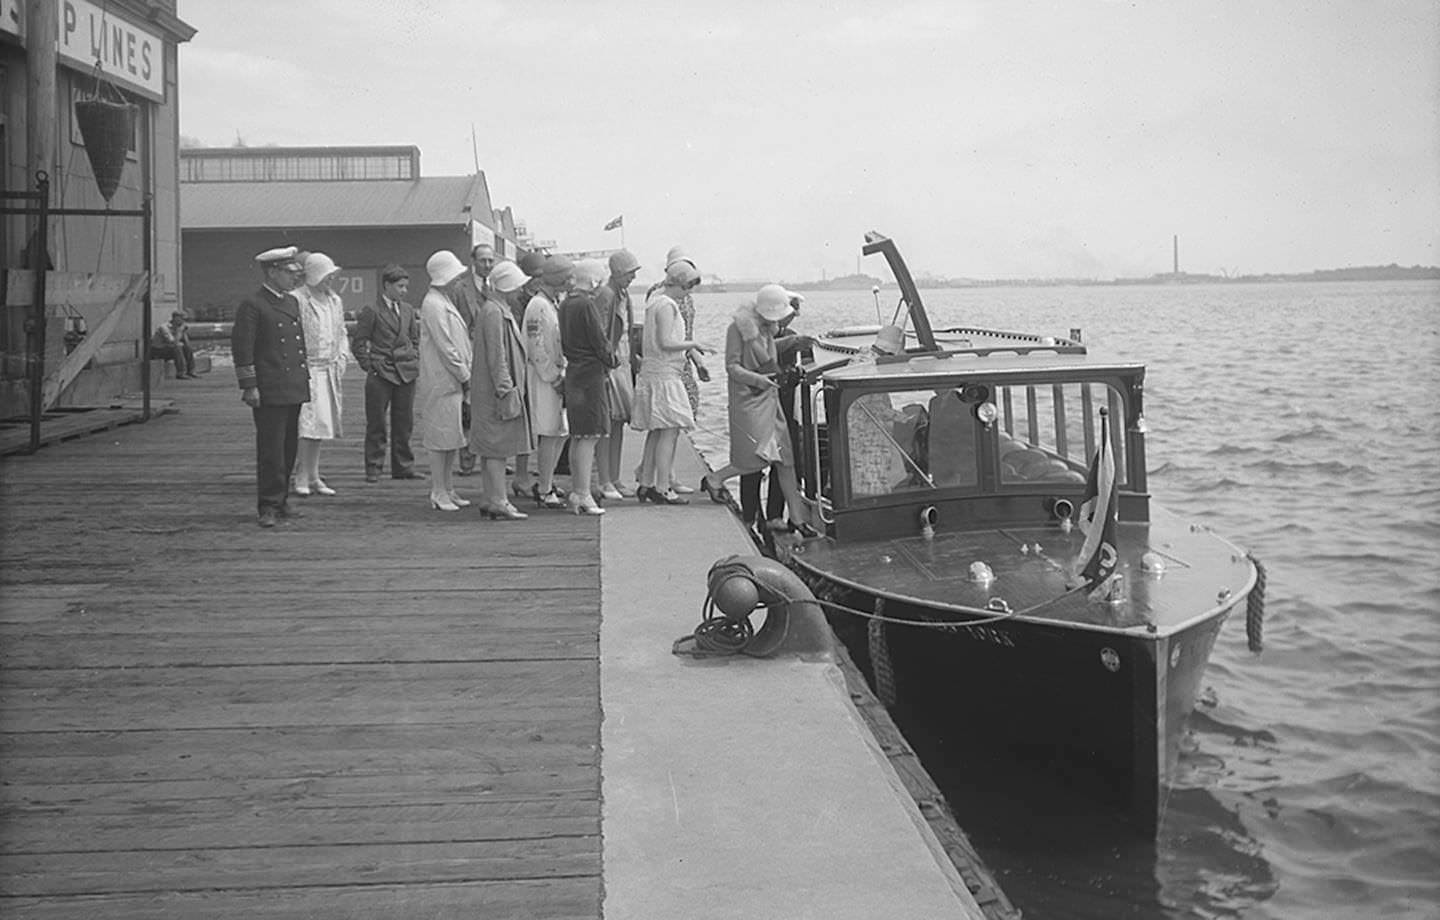 An excited group boards the Miss York motor launch for a tour through the lagoons of Toronto Island, July 29, 1929.